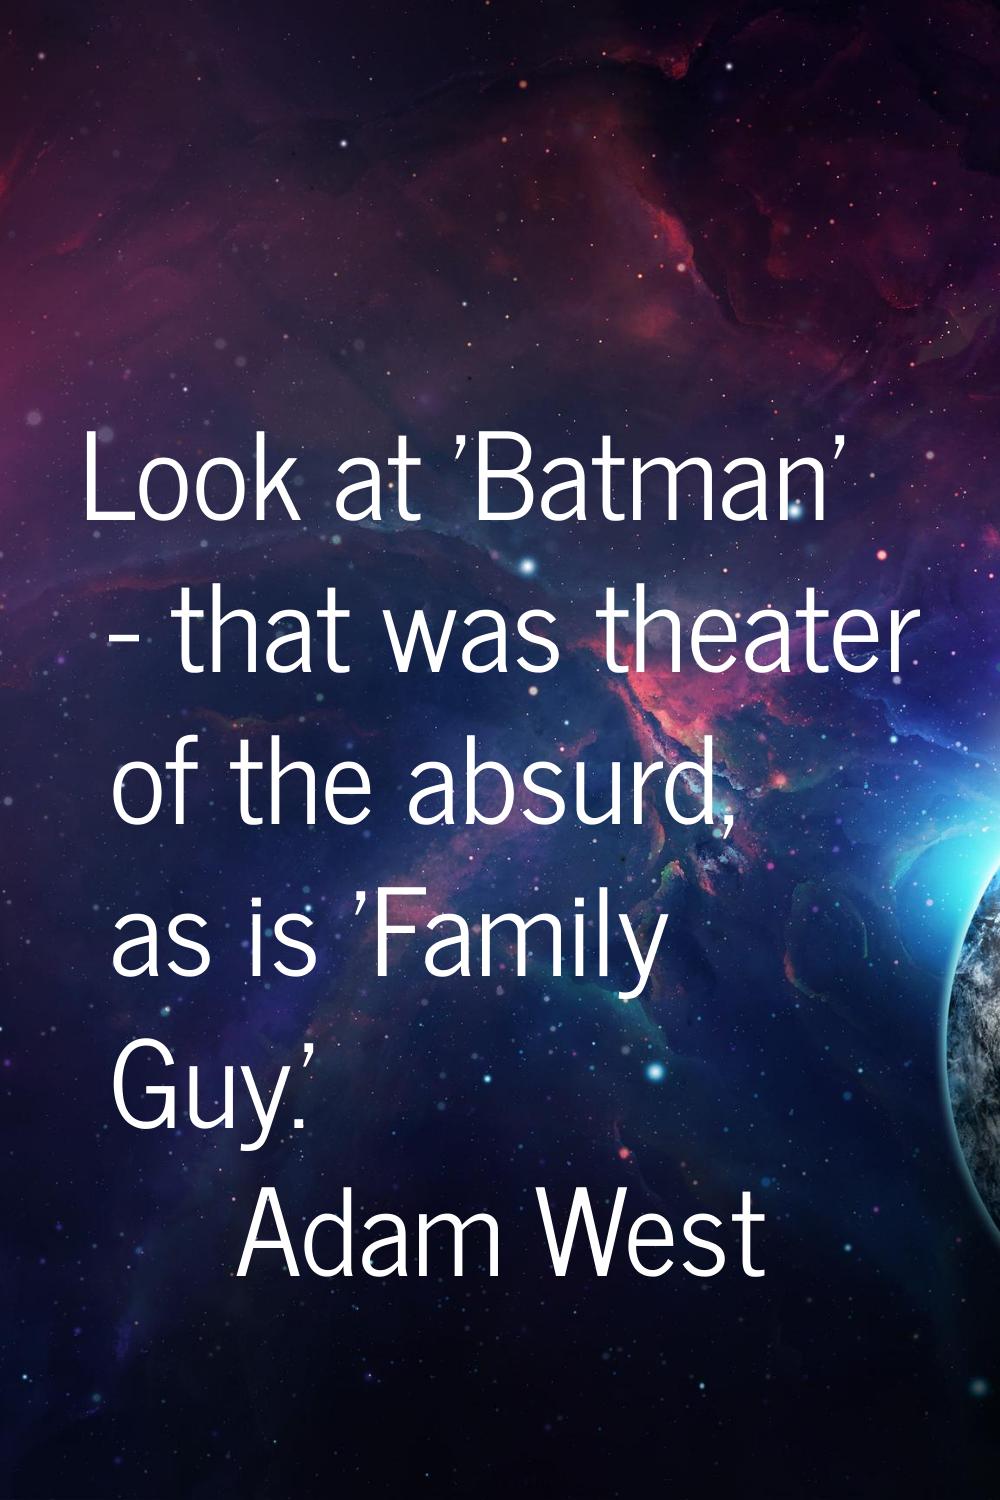 Look at 'Batman' - that was theater of the absurd, as is 'Family Guy.'